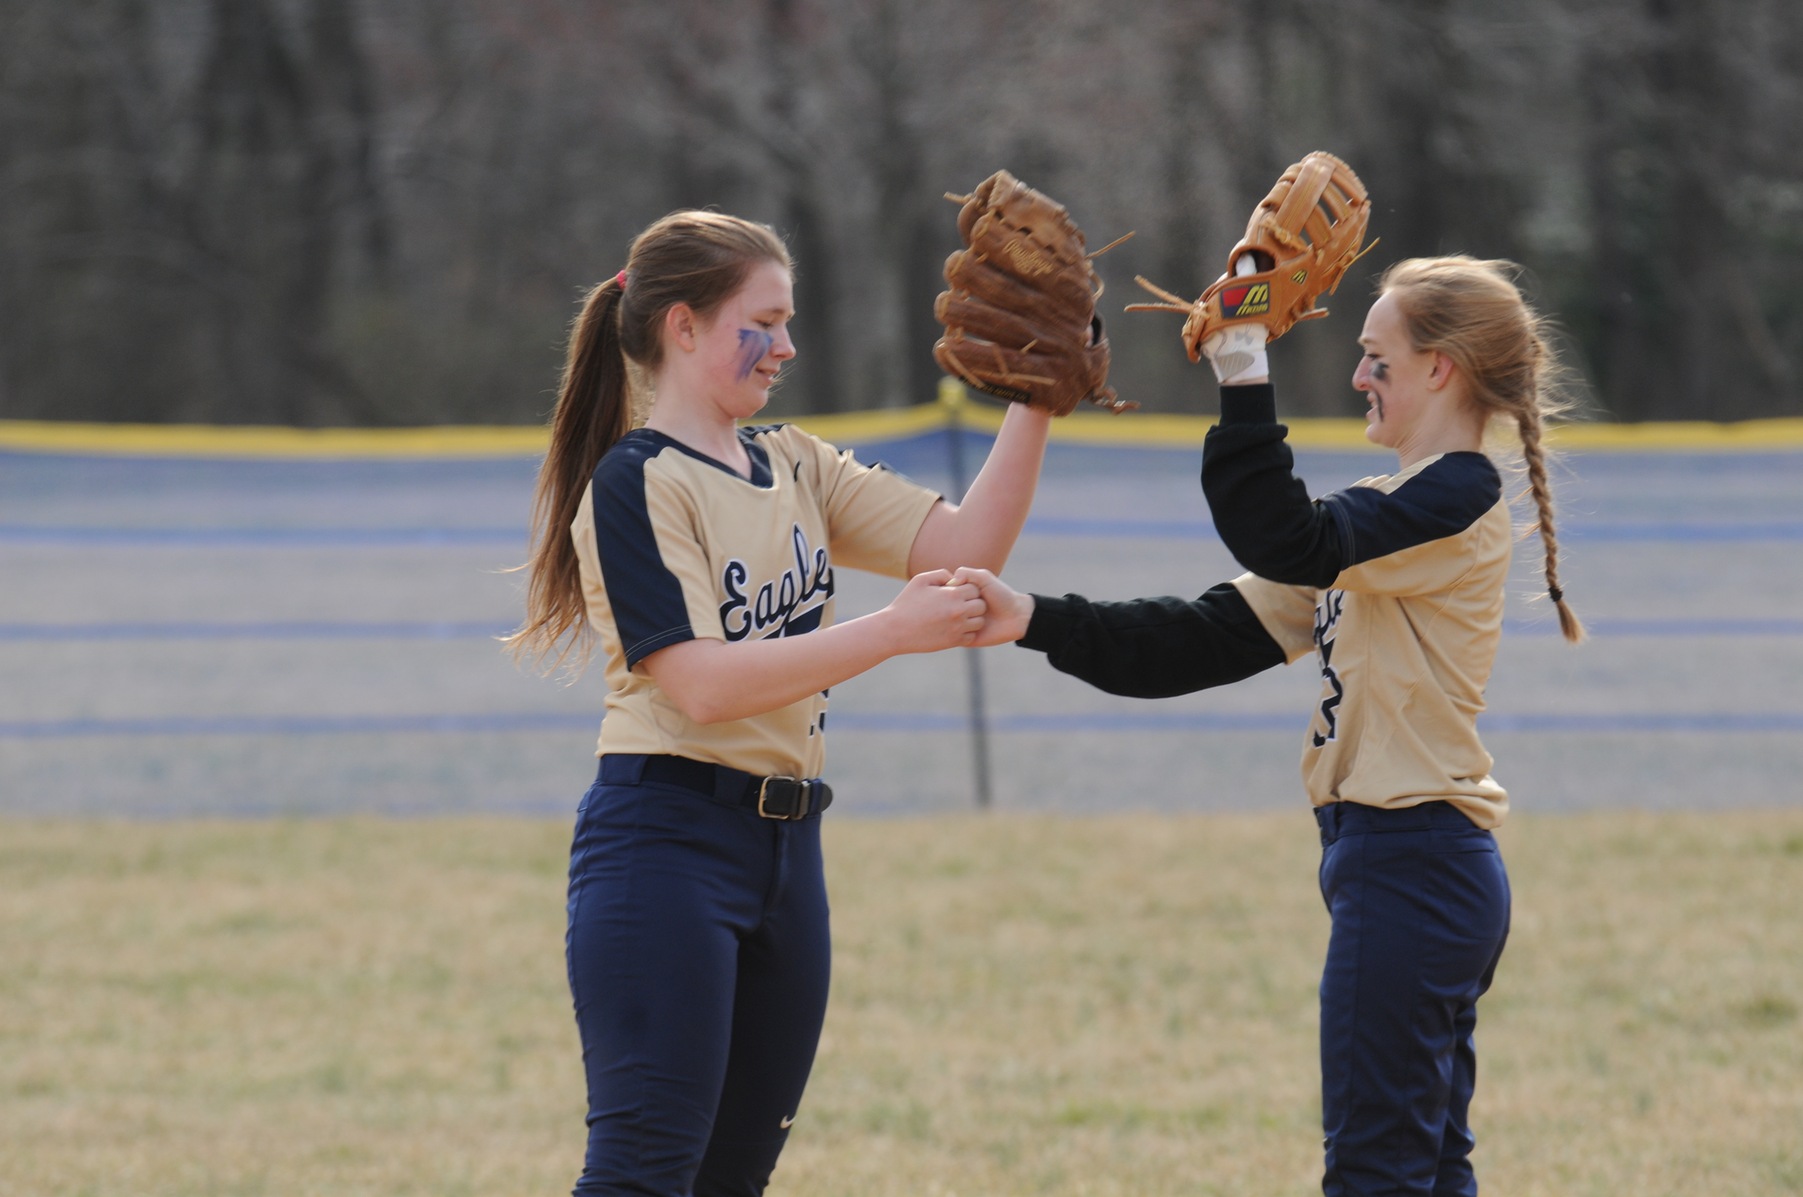 Softball Comes Back To Win In Final Inning